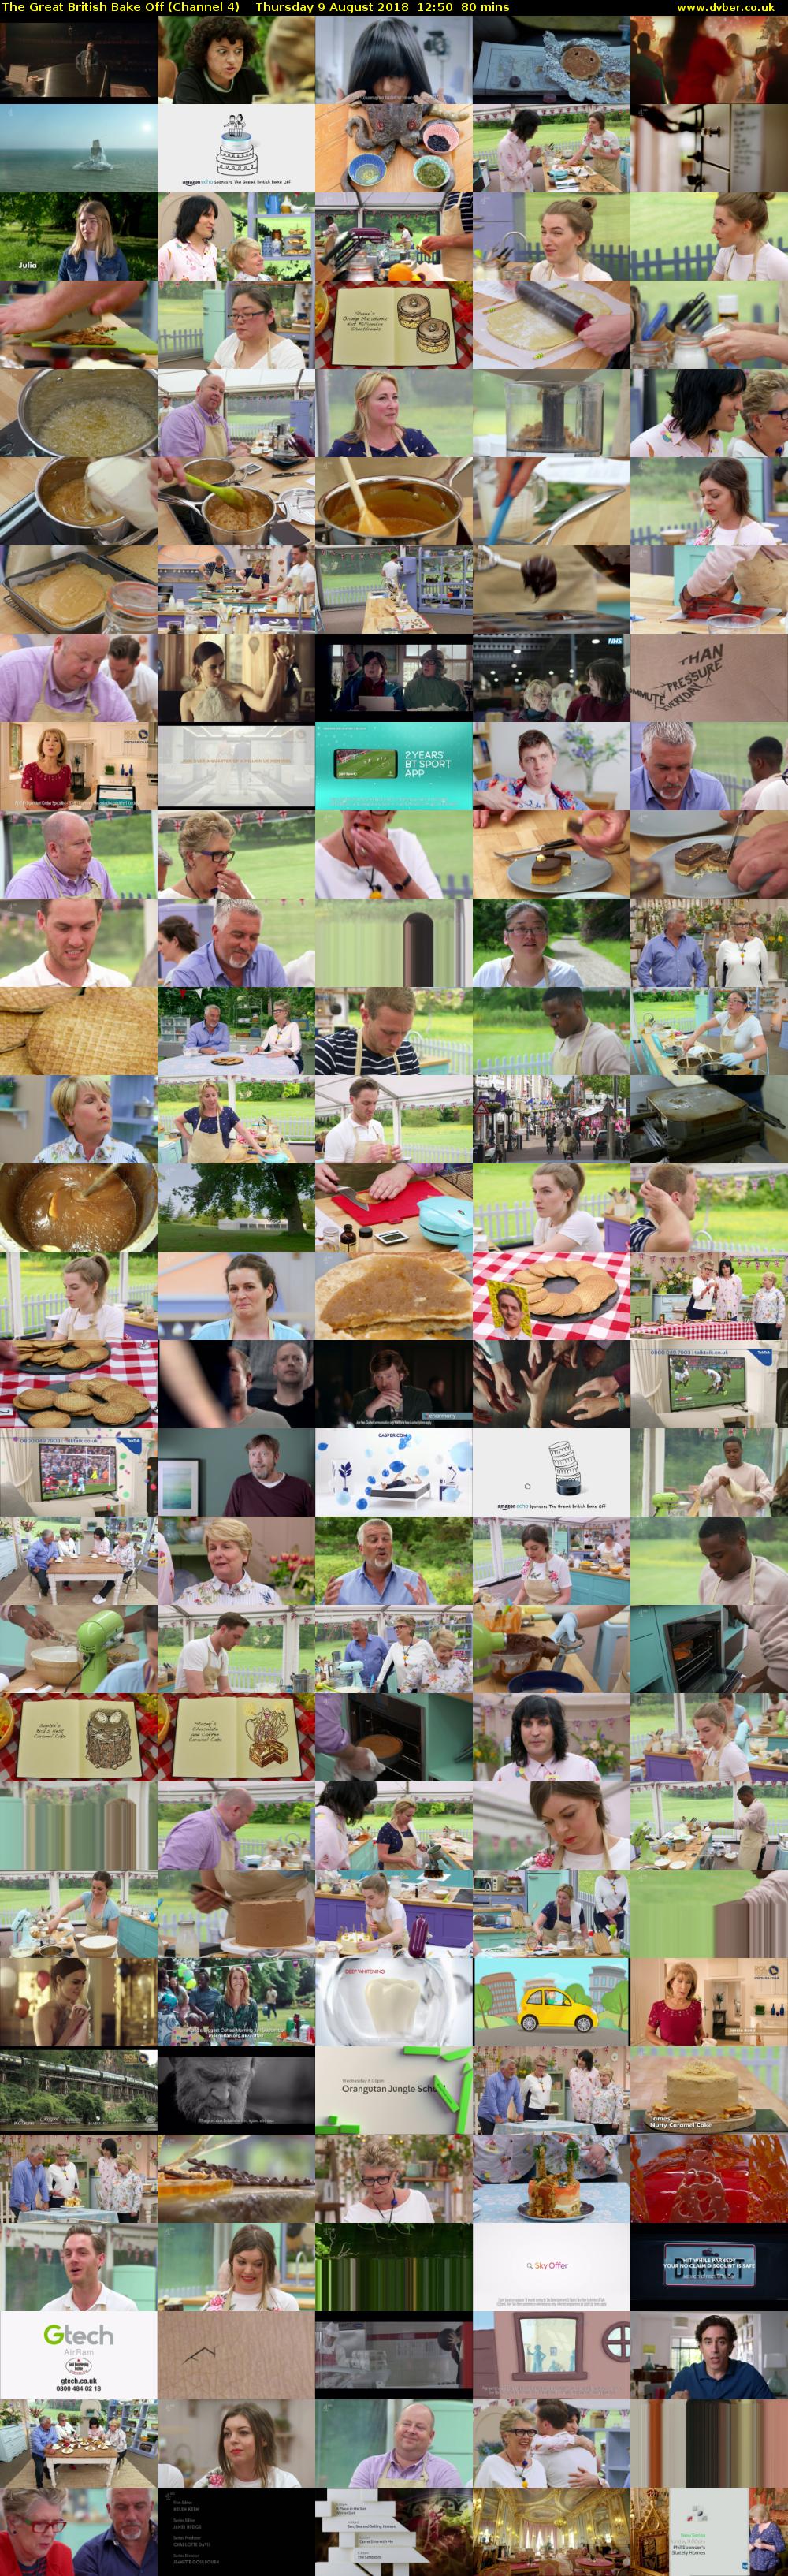 The Great British Bake Off (Channel 4) Thursday 9 August 2018 12:50 - 14:10